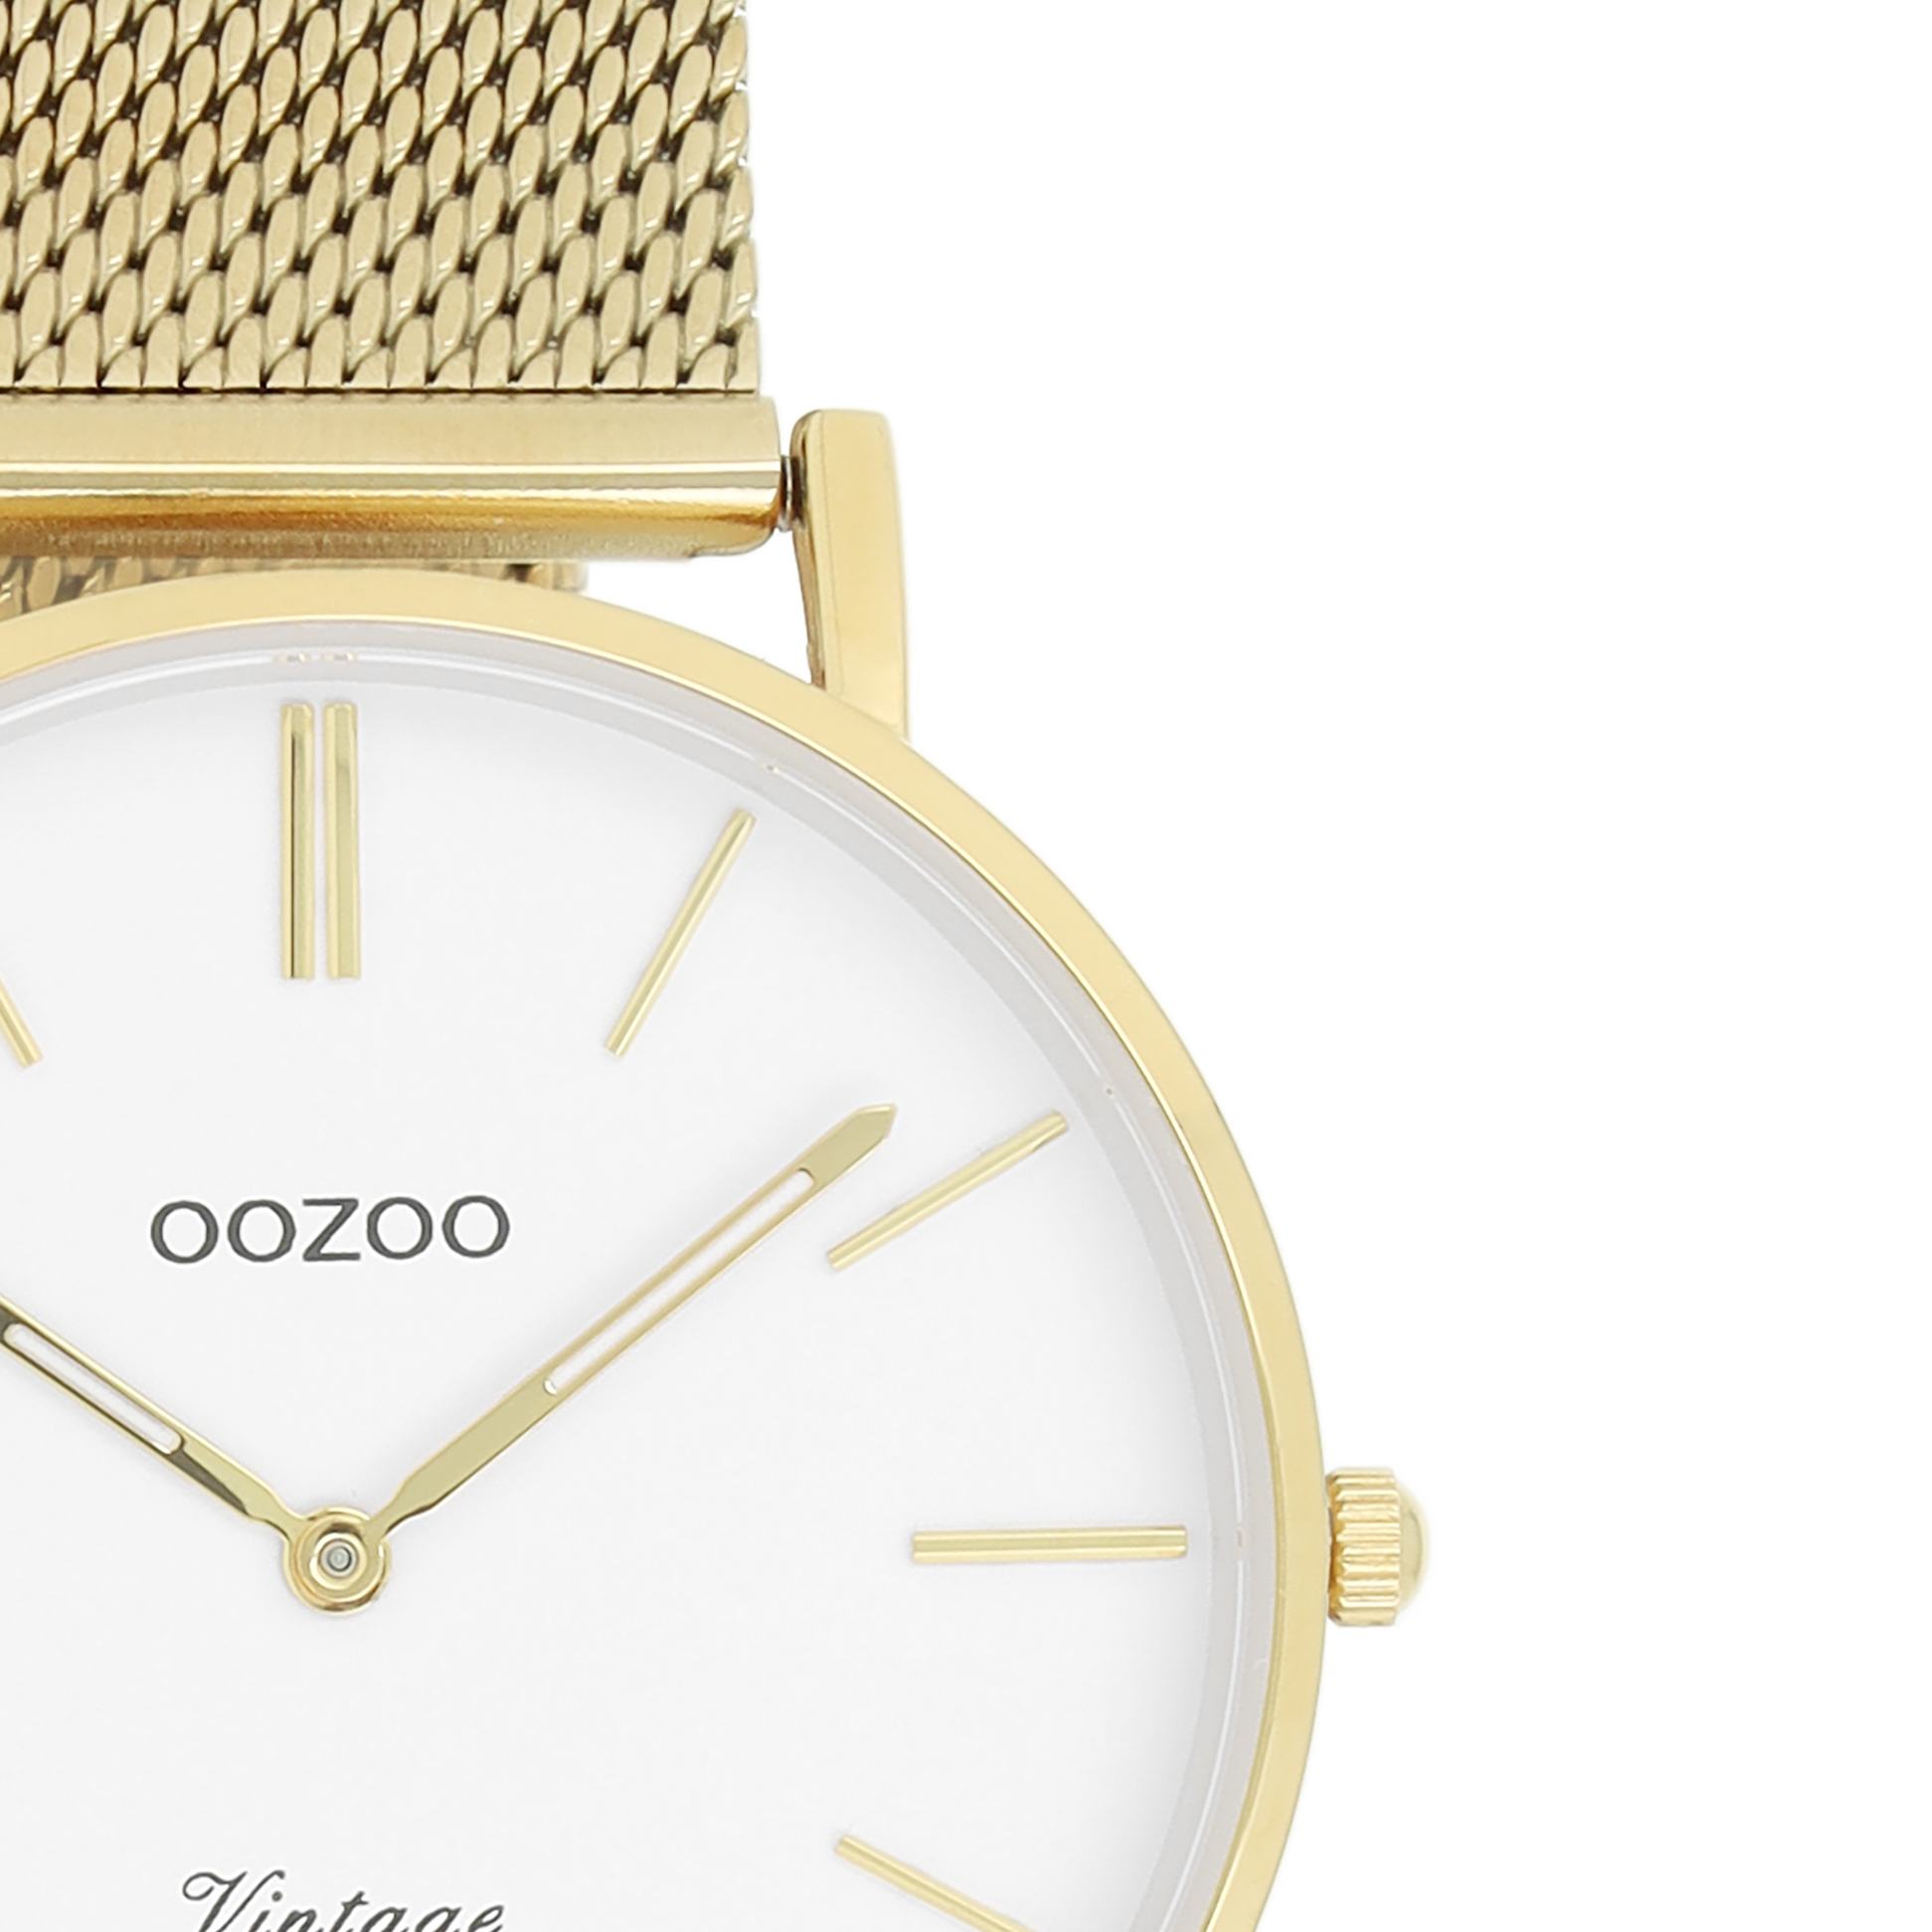 OOZOO Vintage Classics C9910 gold coloured watch & strap